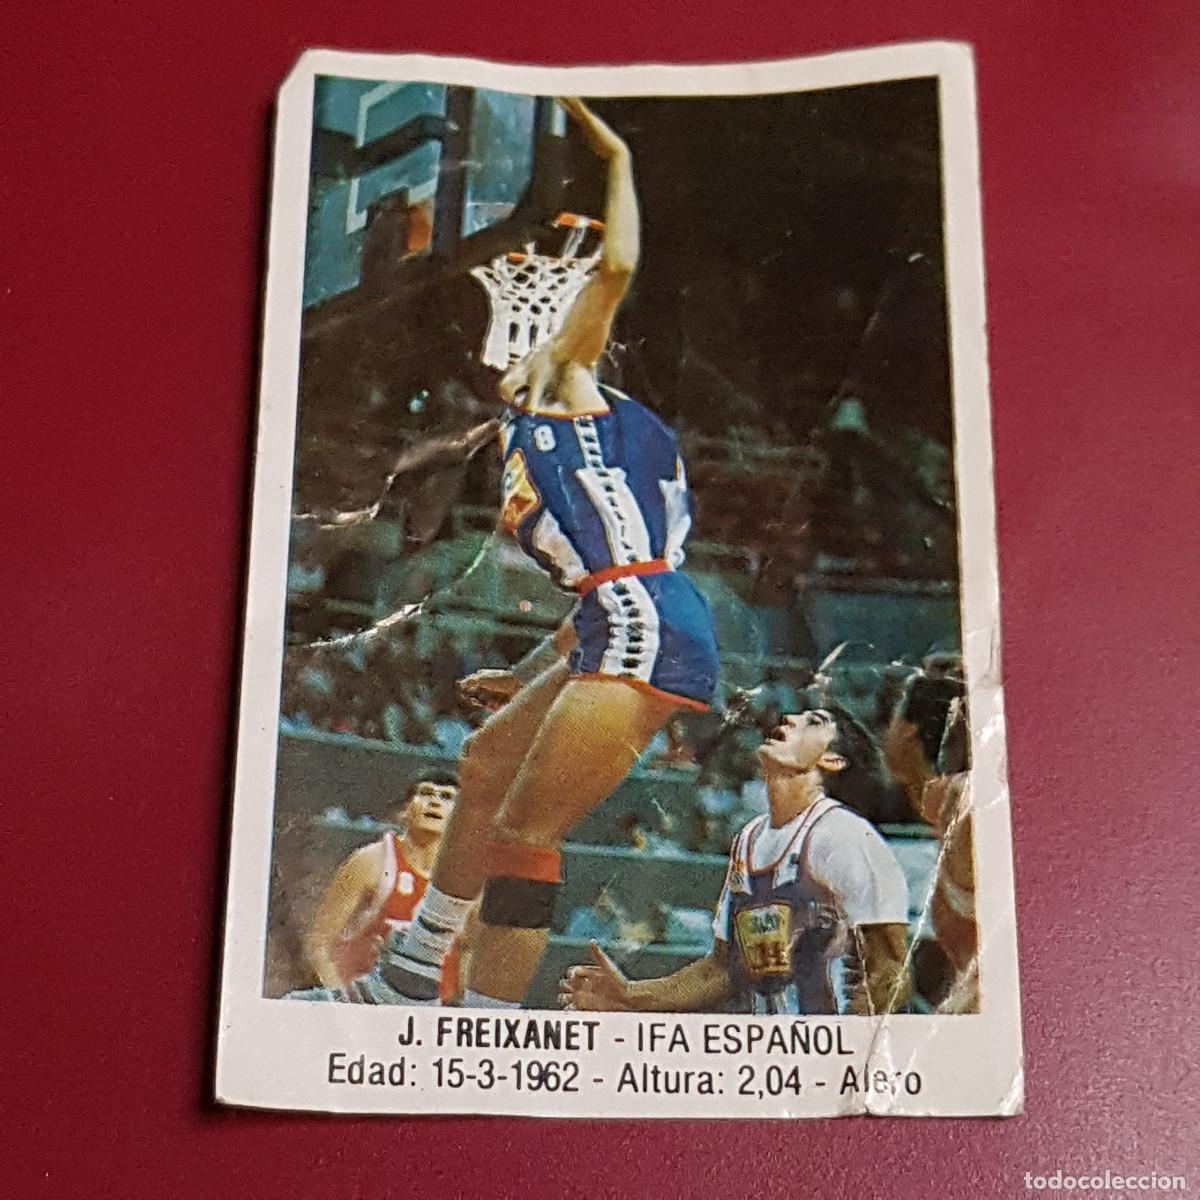 j merchante - converse 1988 - 88 - j freixanet - Buy Collectible stickers  of other sports on todocoleccion